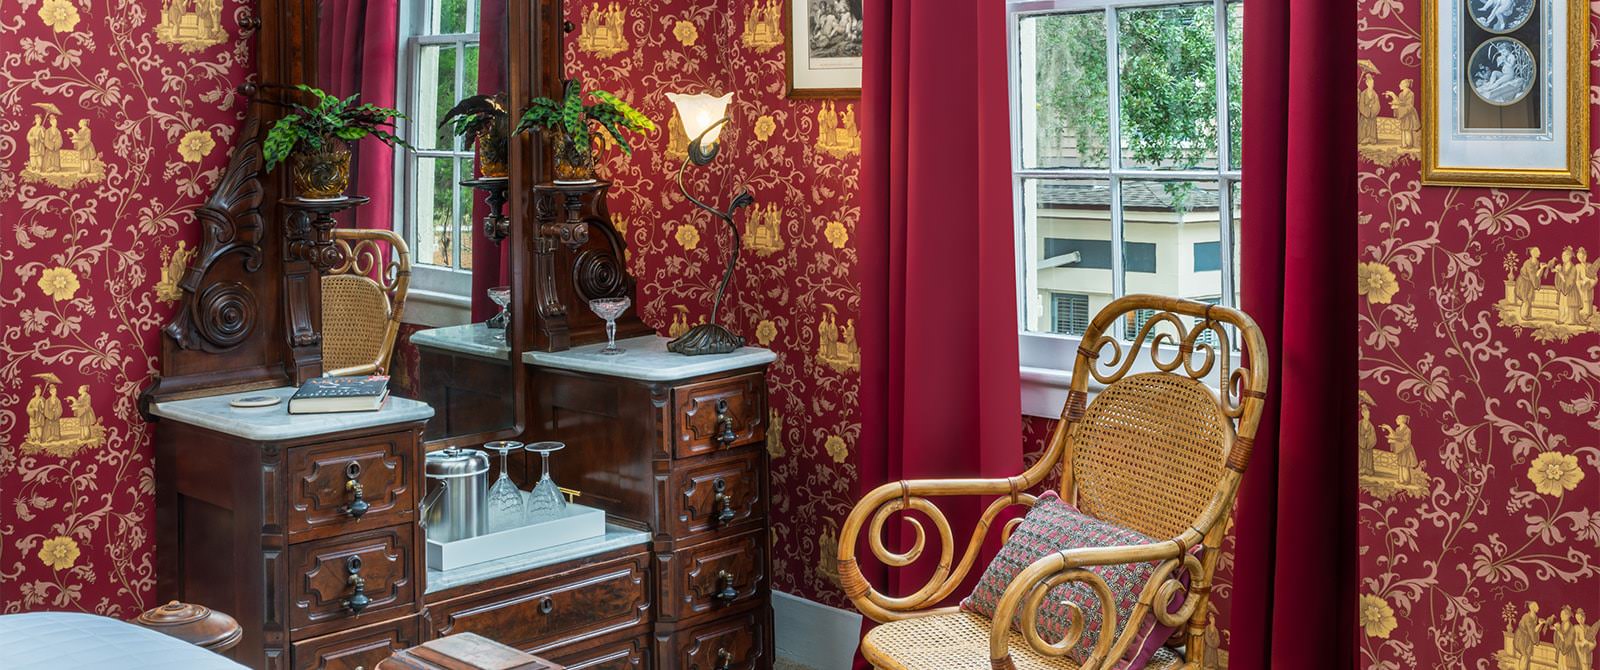 Bedroom with red ornate wallpaper, carpeting, antique wooden dresser with mirror, ornate wicker chair, and window